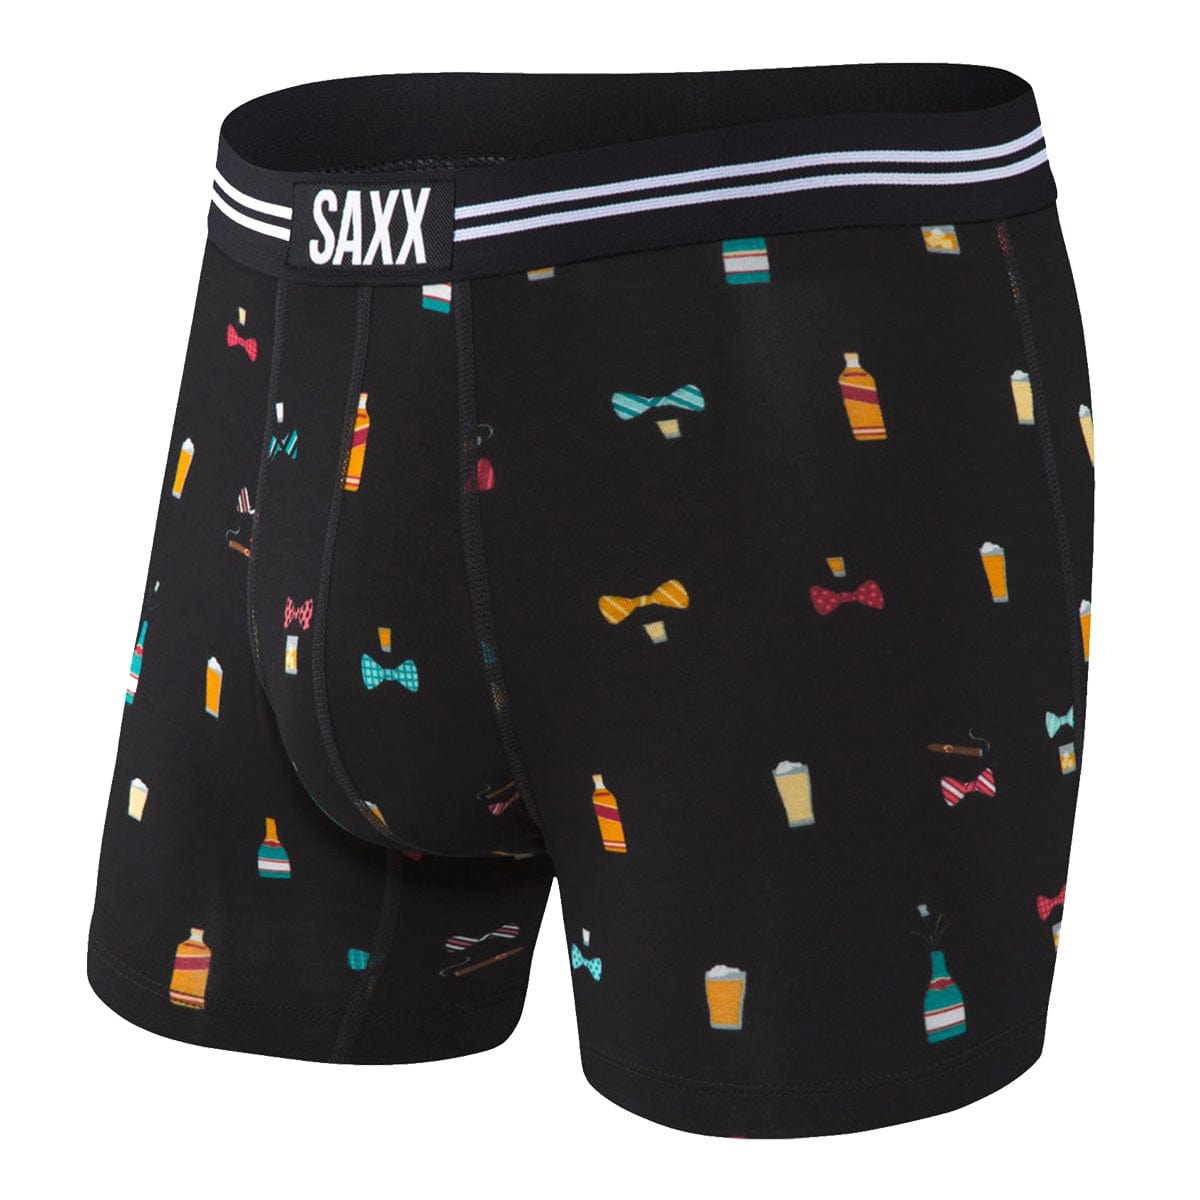 Saxx Vibe Boxers - Bowties N Booze - The Hockey Shop Source For Sports